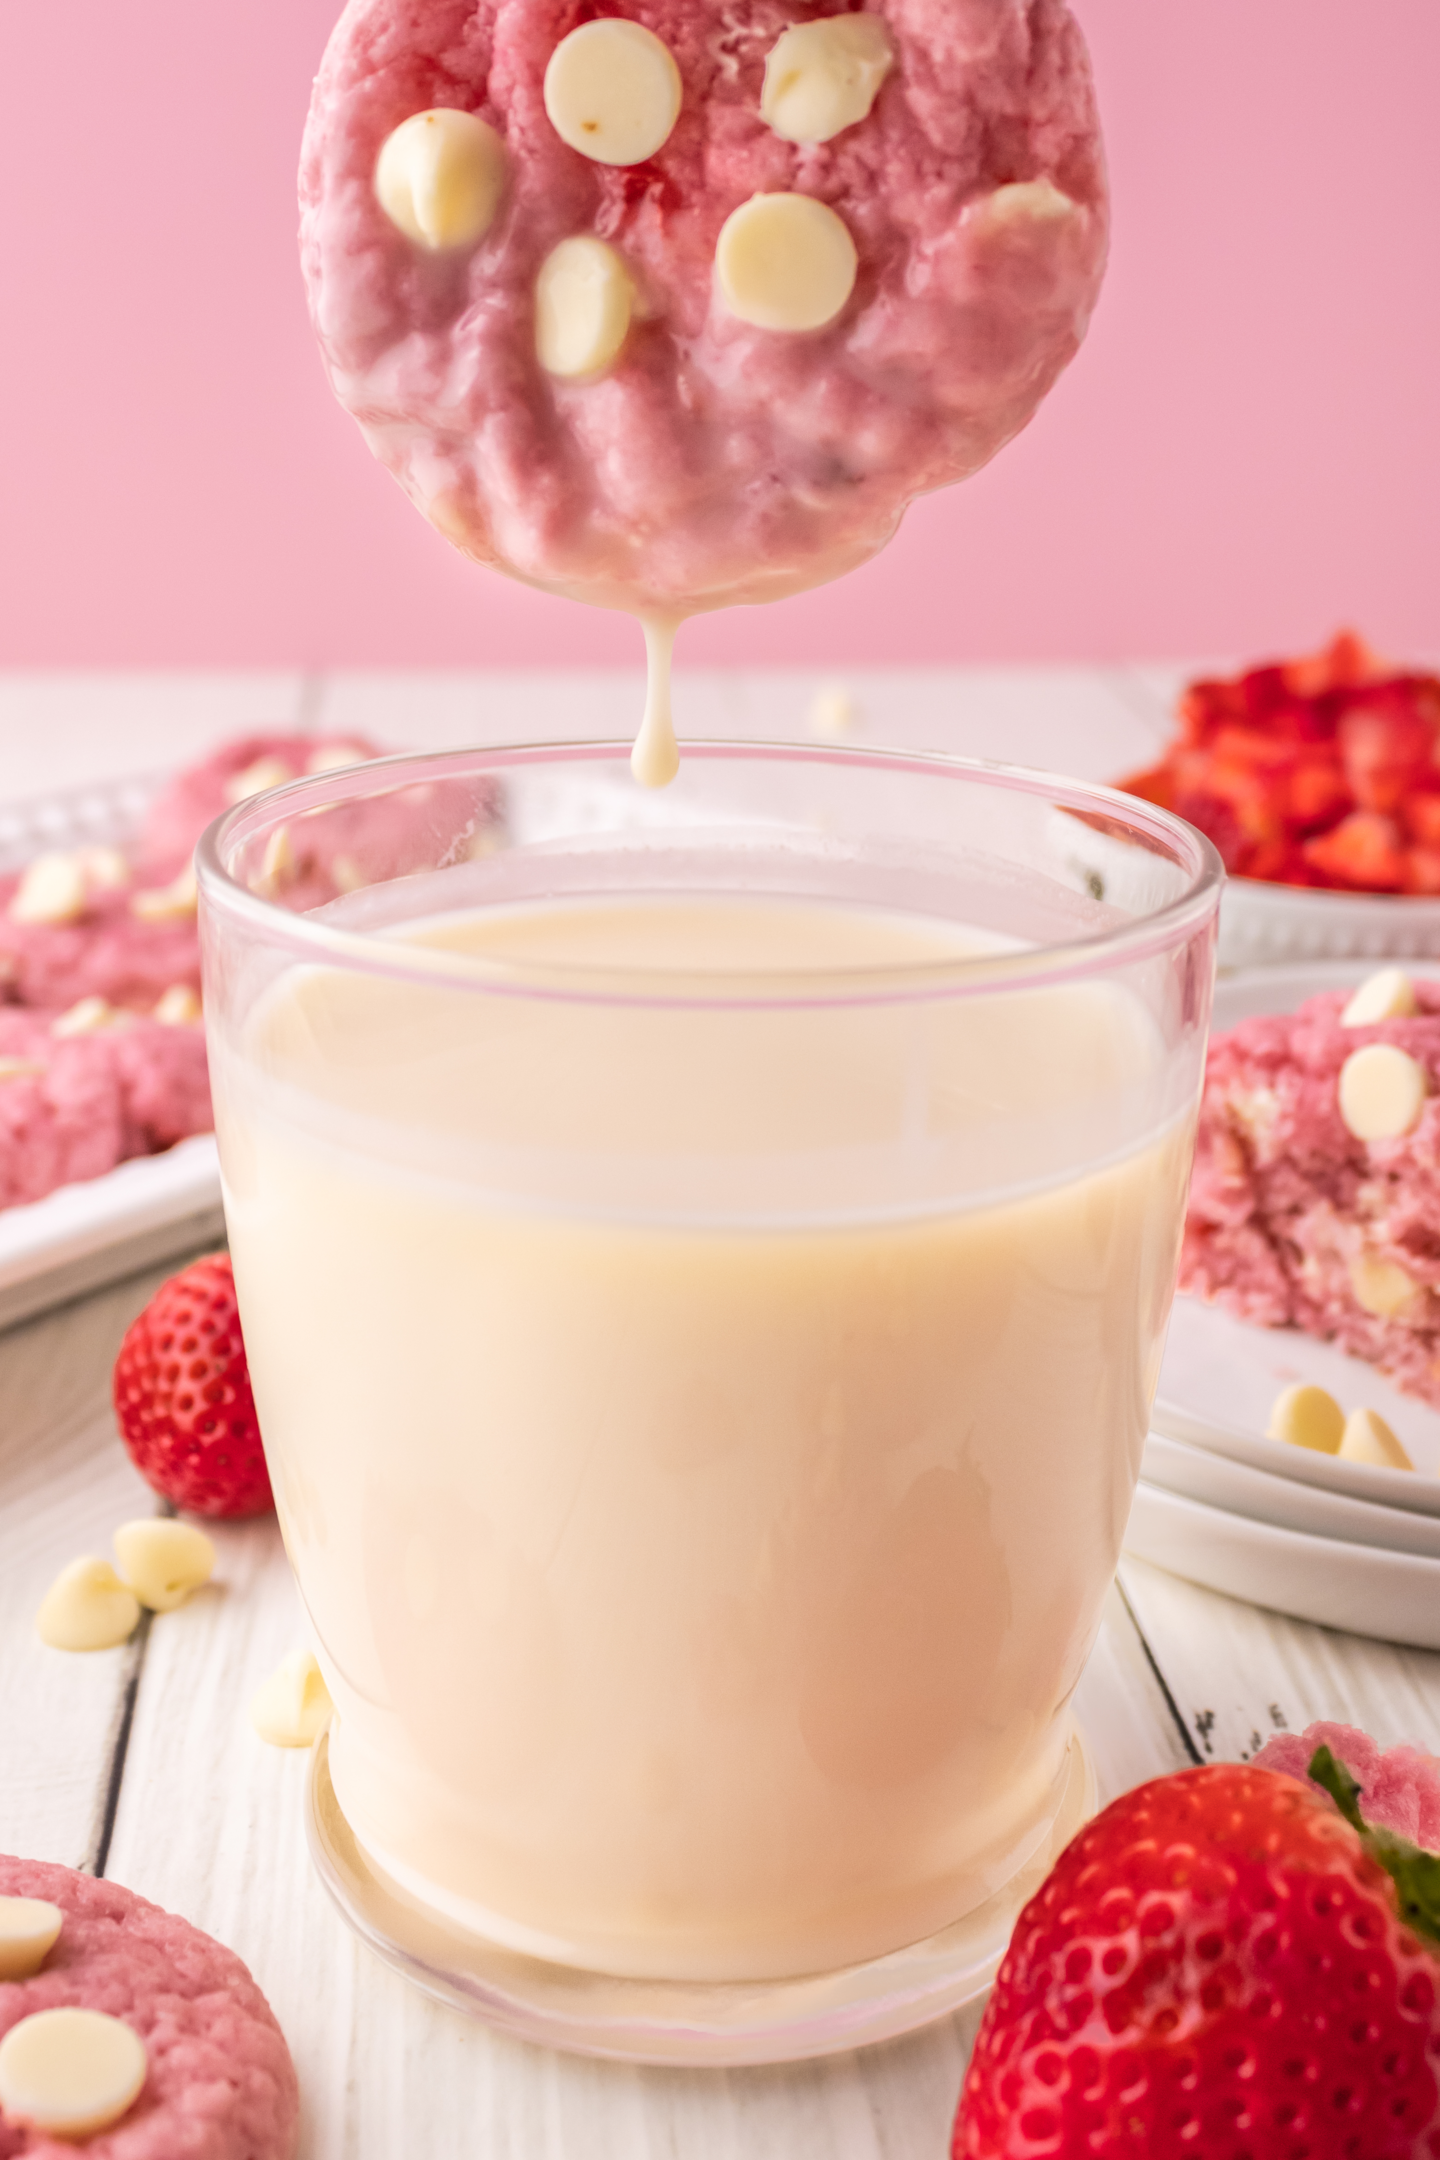 strawberry white chocolate chip cookie dunked in milk